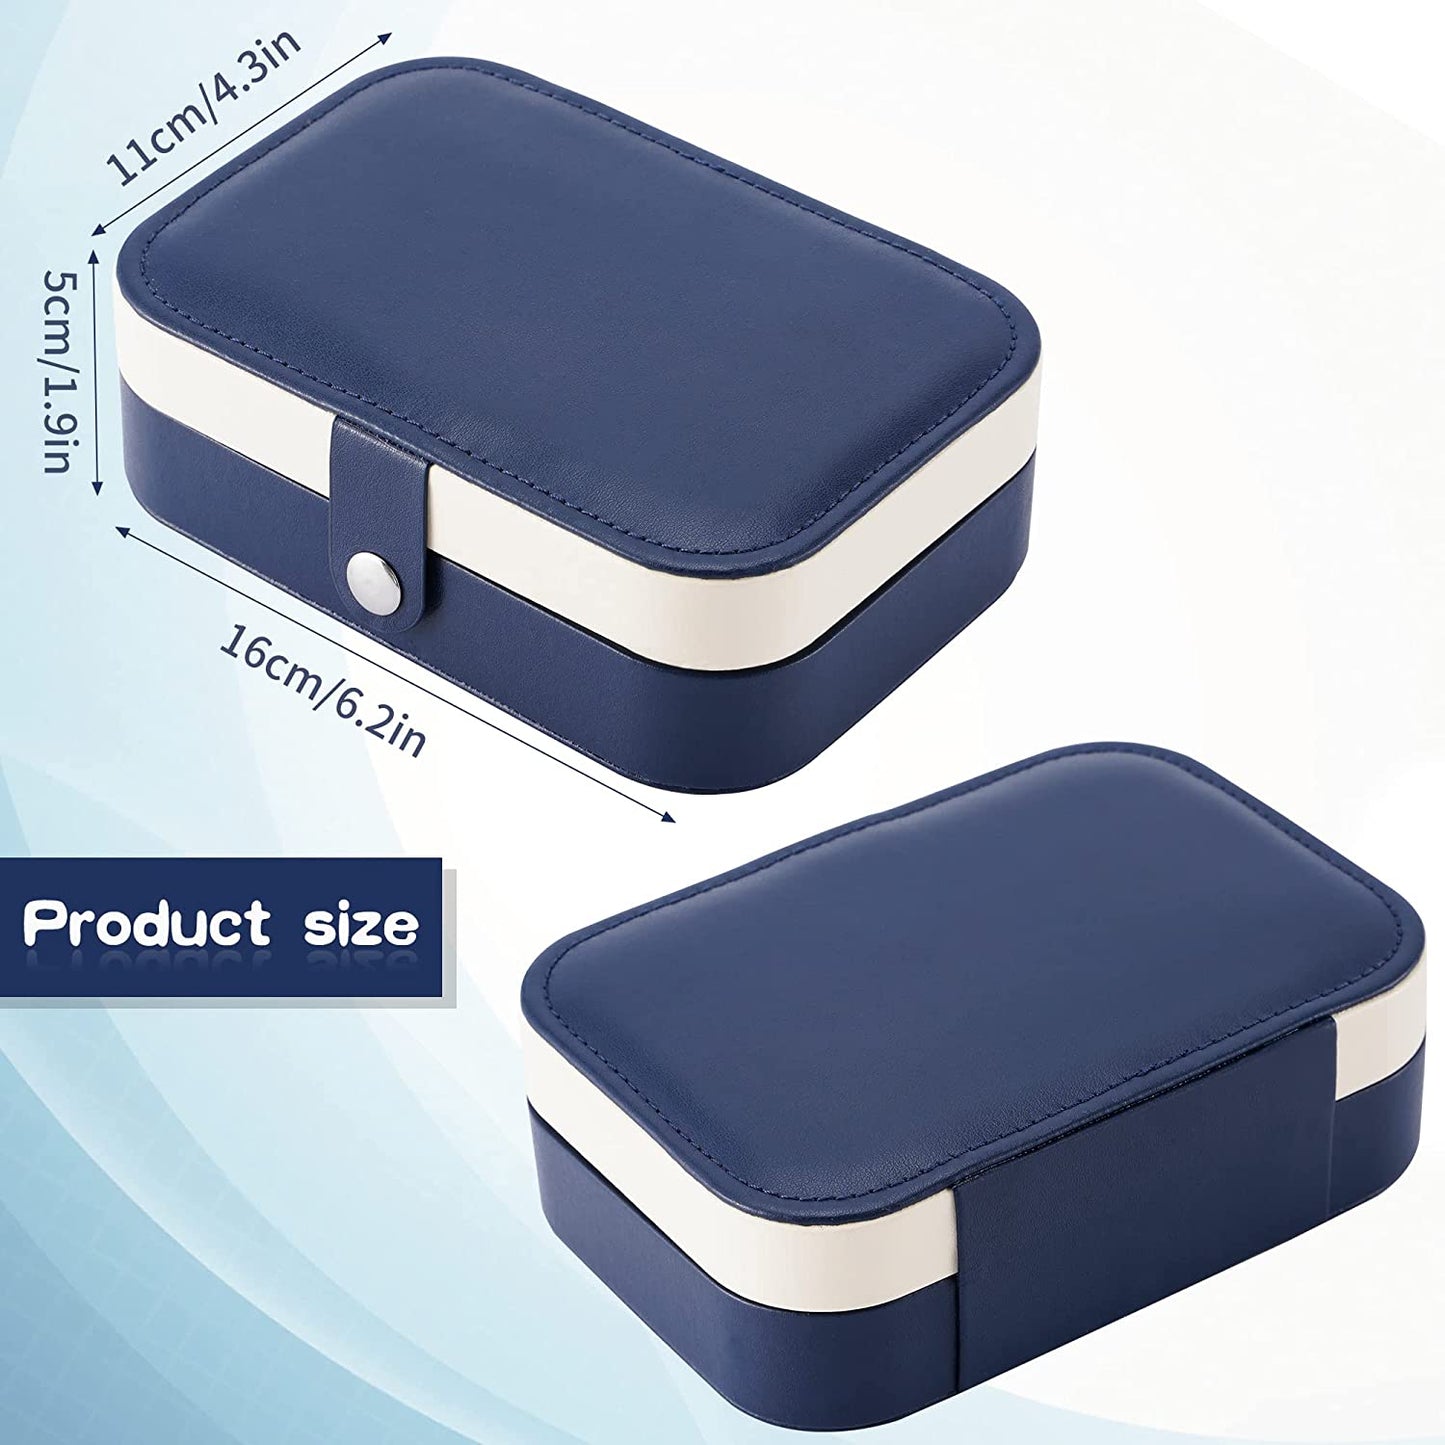 Travel Jewelry Box, PU Leather Small Jewelry Organizer for Women Girls, Double Layer Portable Mini Travel Case Display Storage Holder Boxes for Stud Earrings, Rings,Necklaces,Bracelets (Dark Blue)